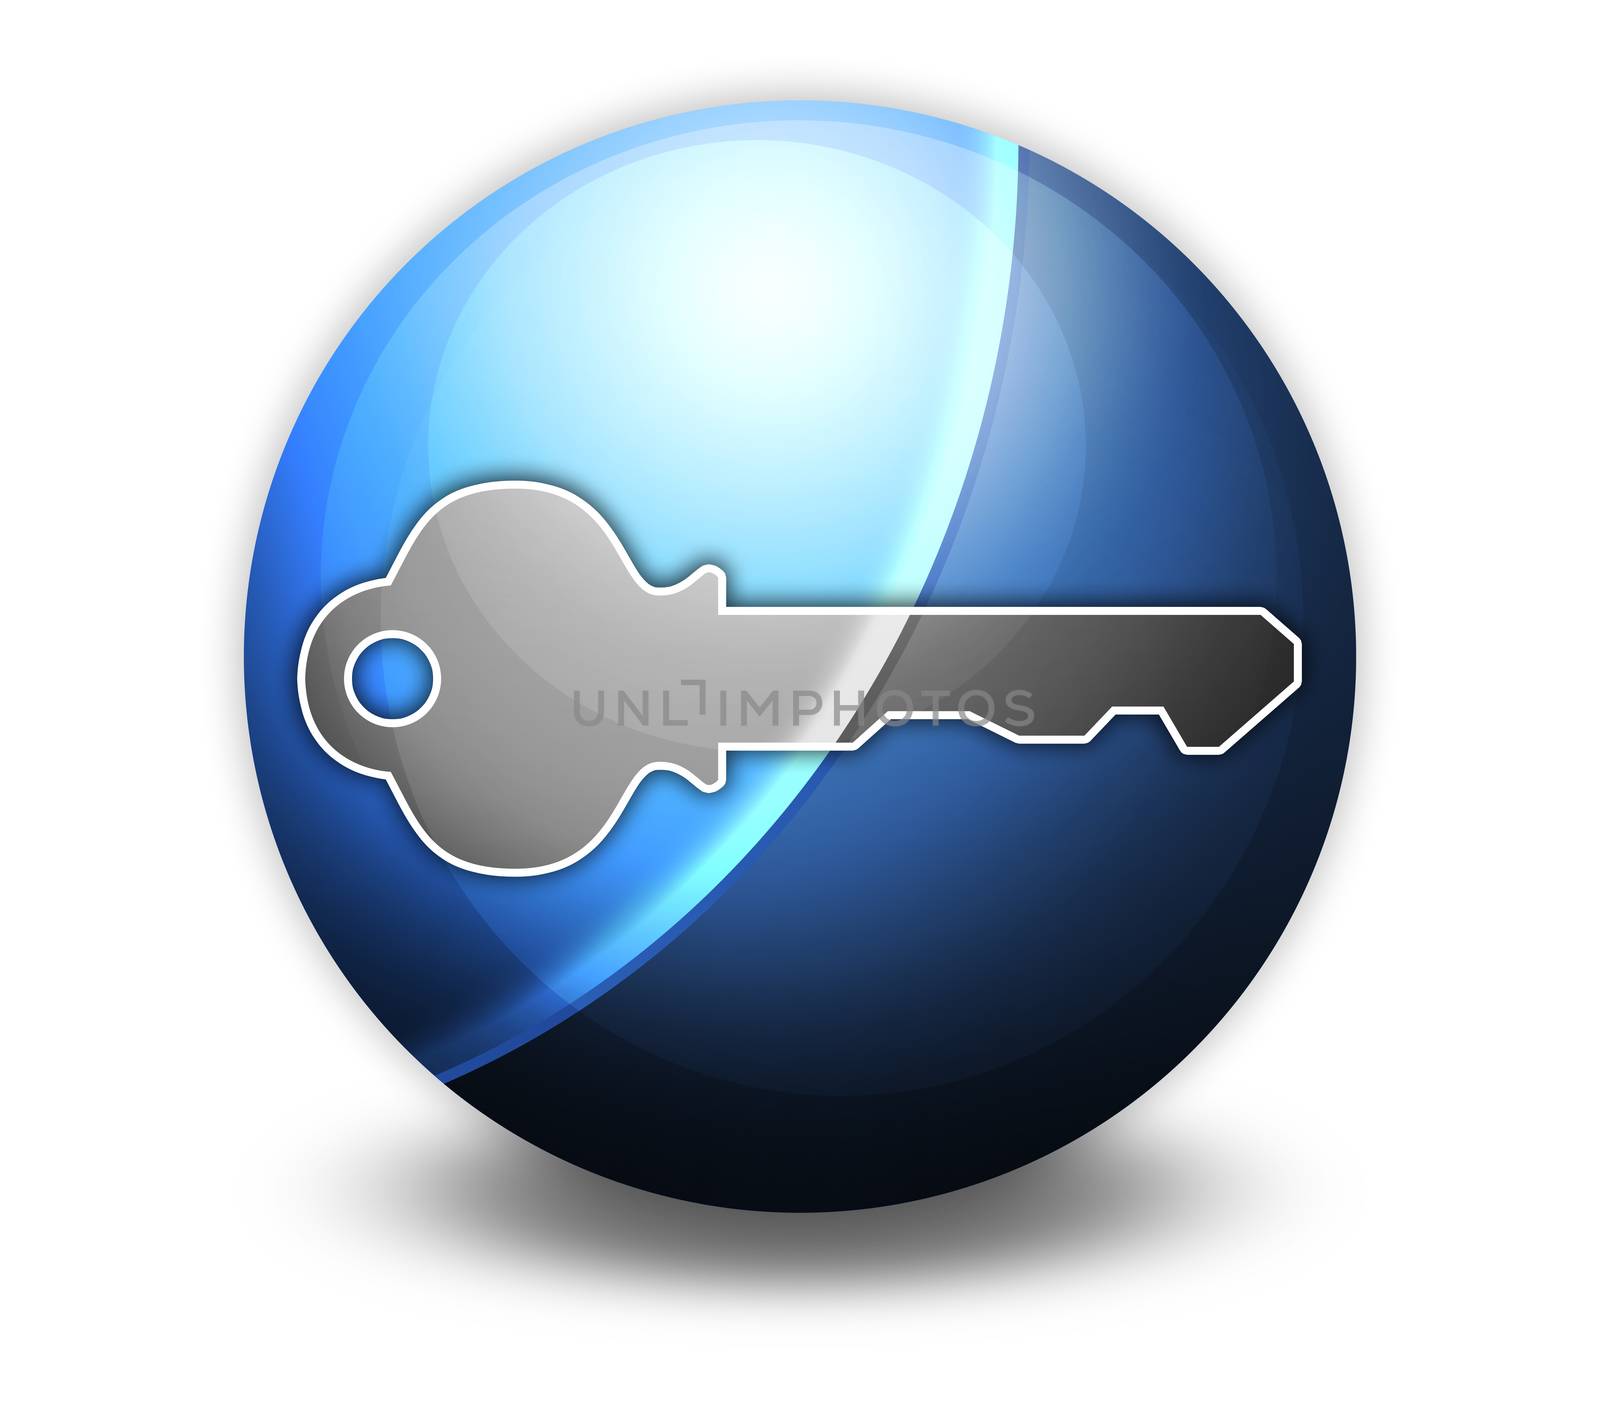 Icon, Button, Pictogram Key by mindscanner